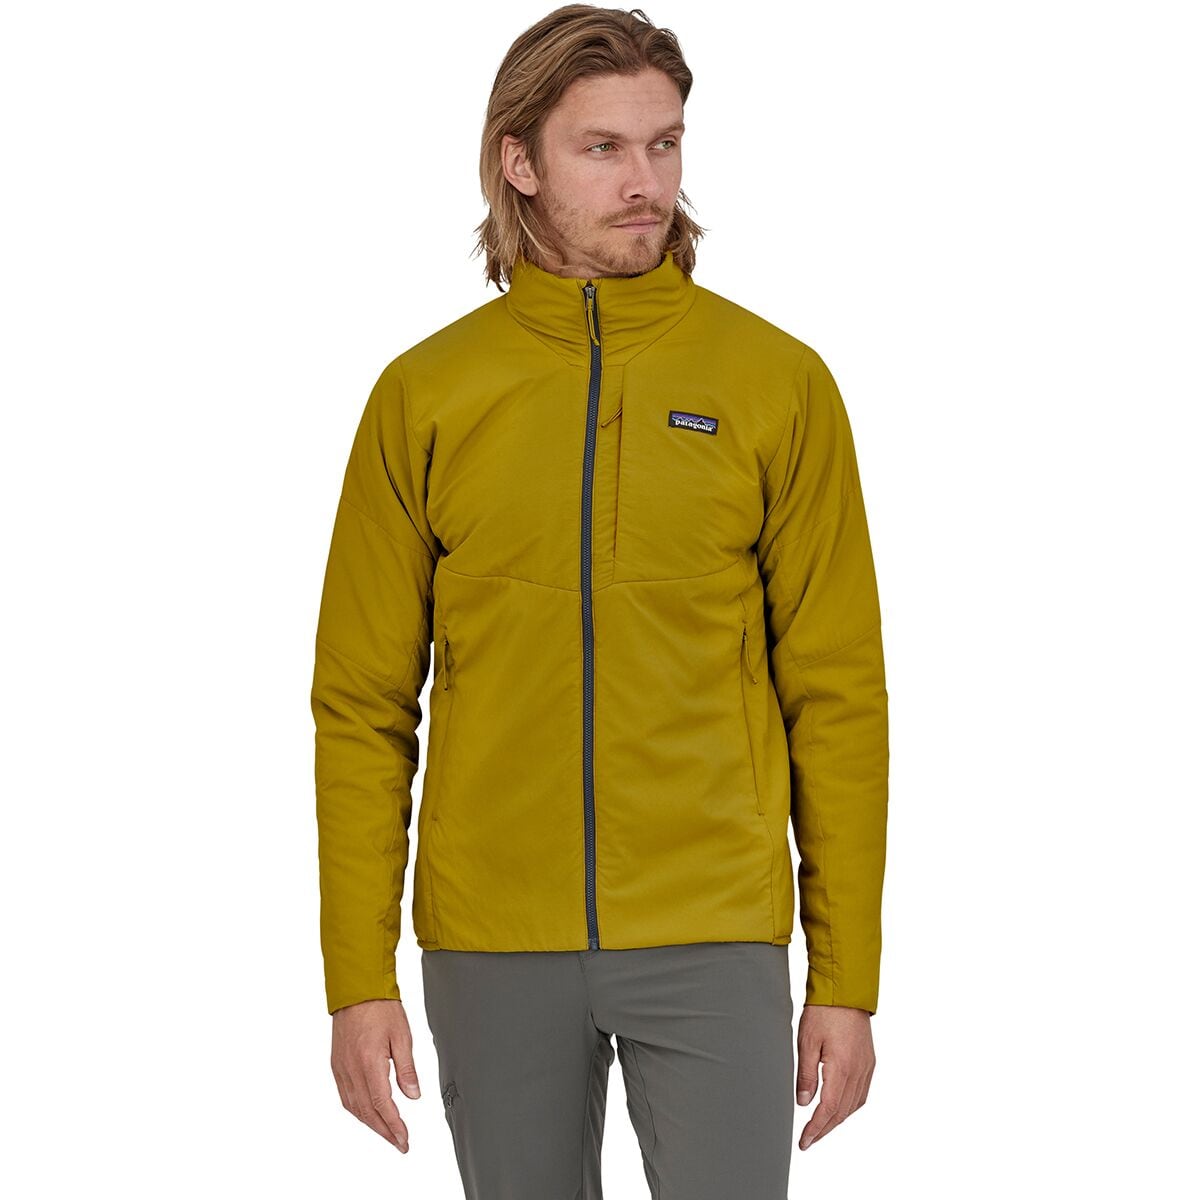 Patagonia Insulated Jacket - Men's - Clothing